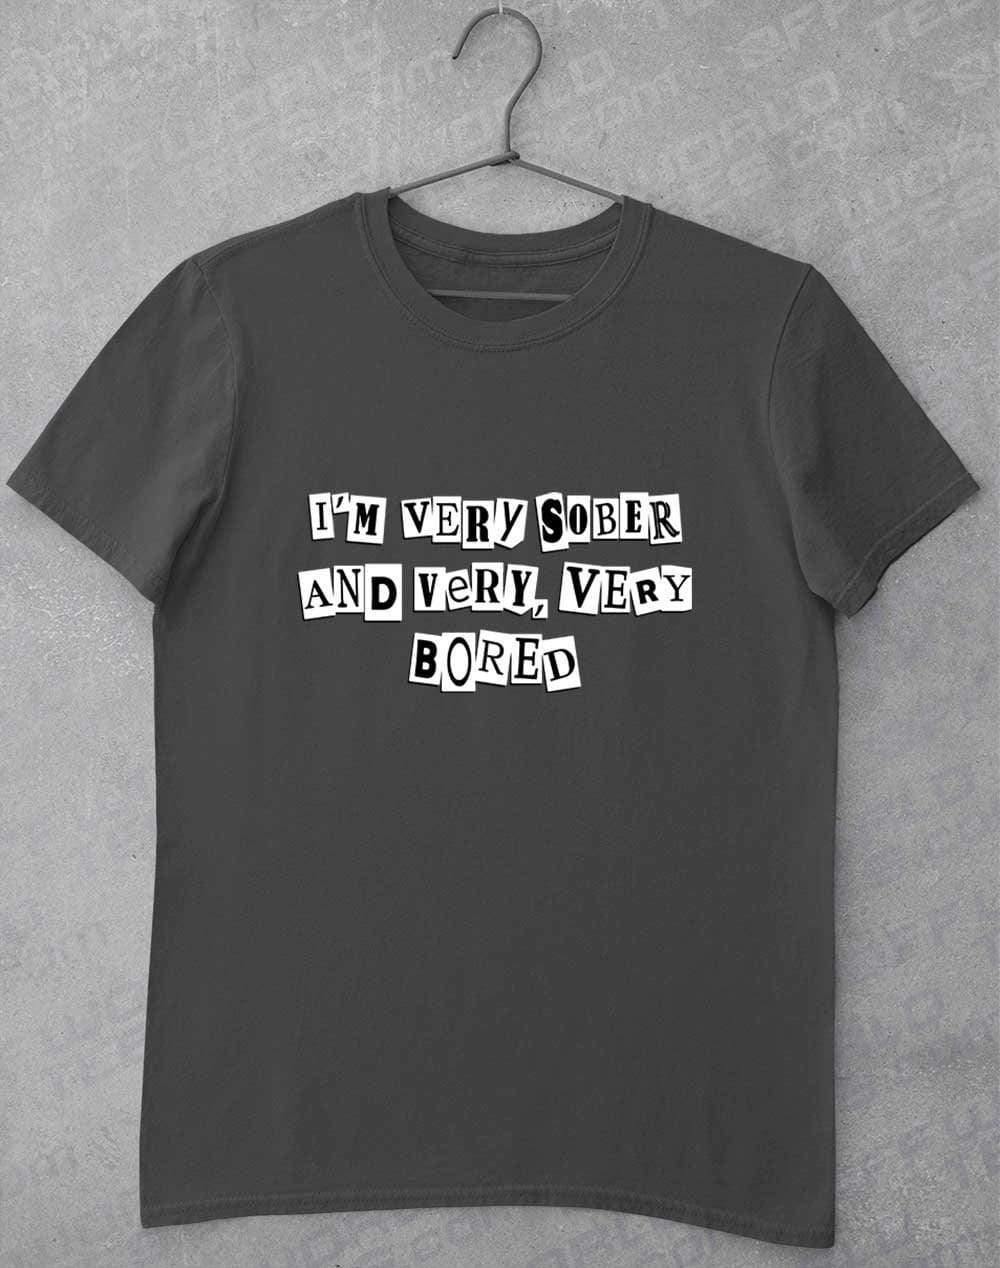 I'm Very Sober and Very Very Bored T-Shirt S / Charcoal  - Off World Tees